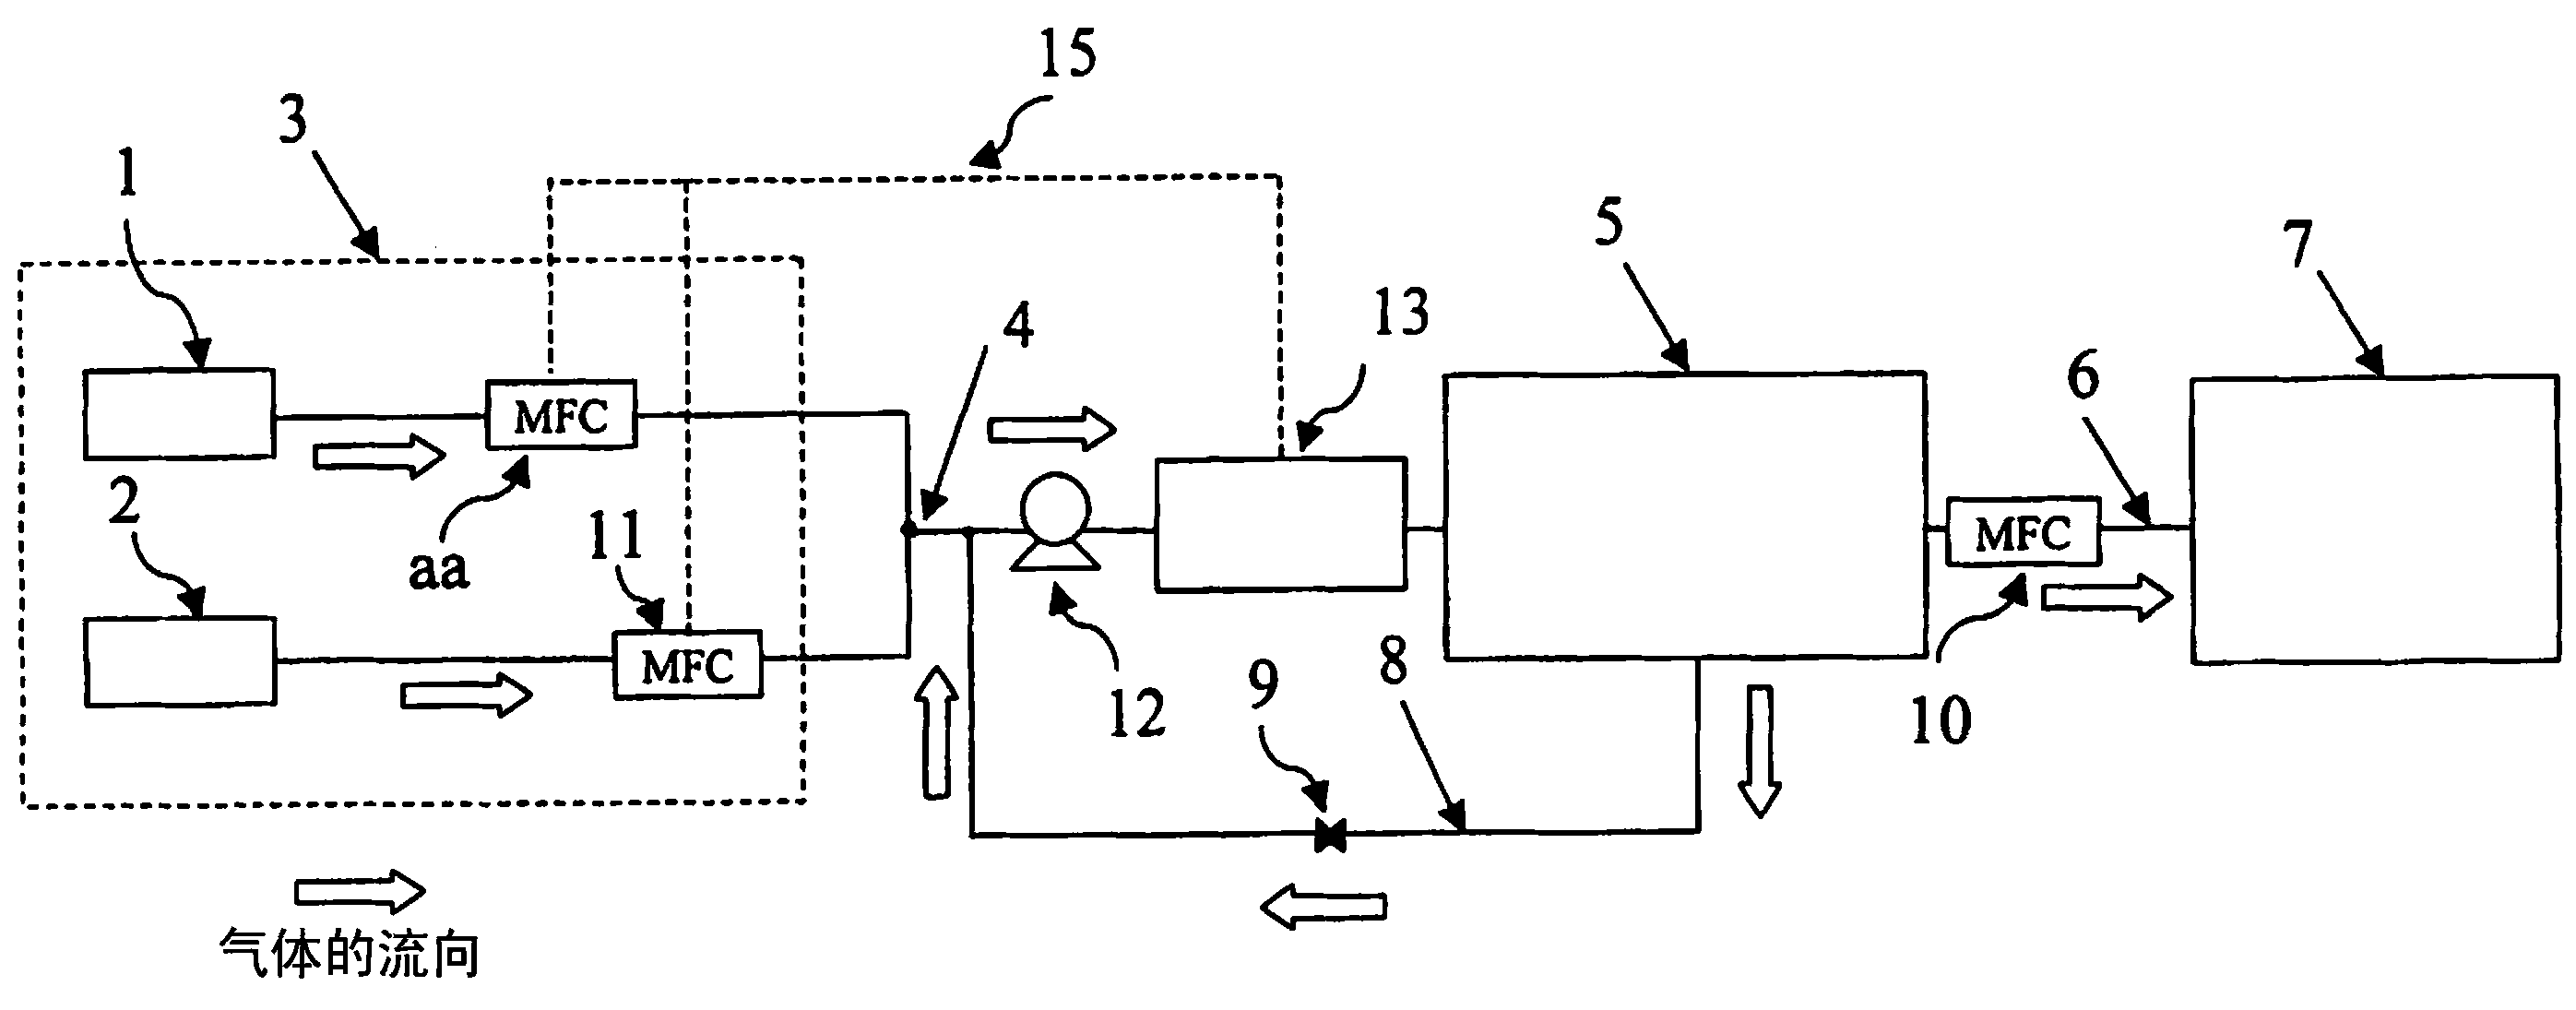 System for in-situ mixing and diluting fluorine gas